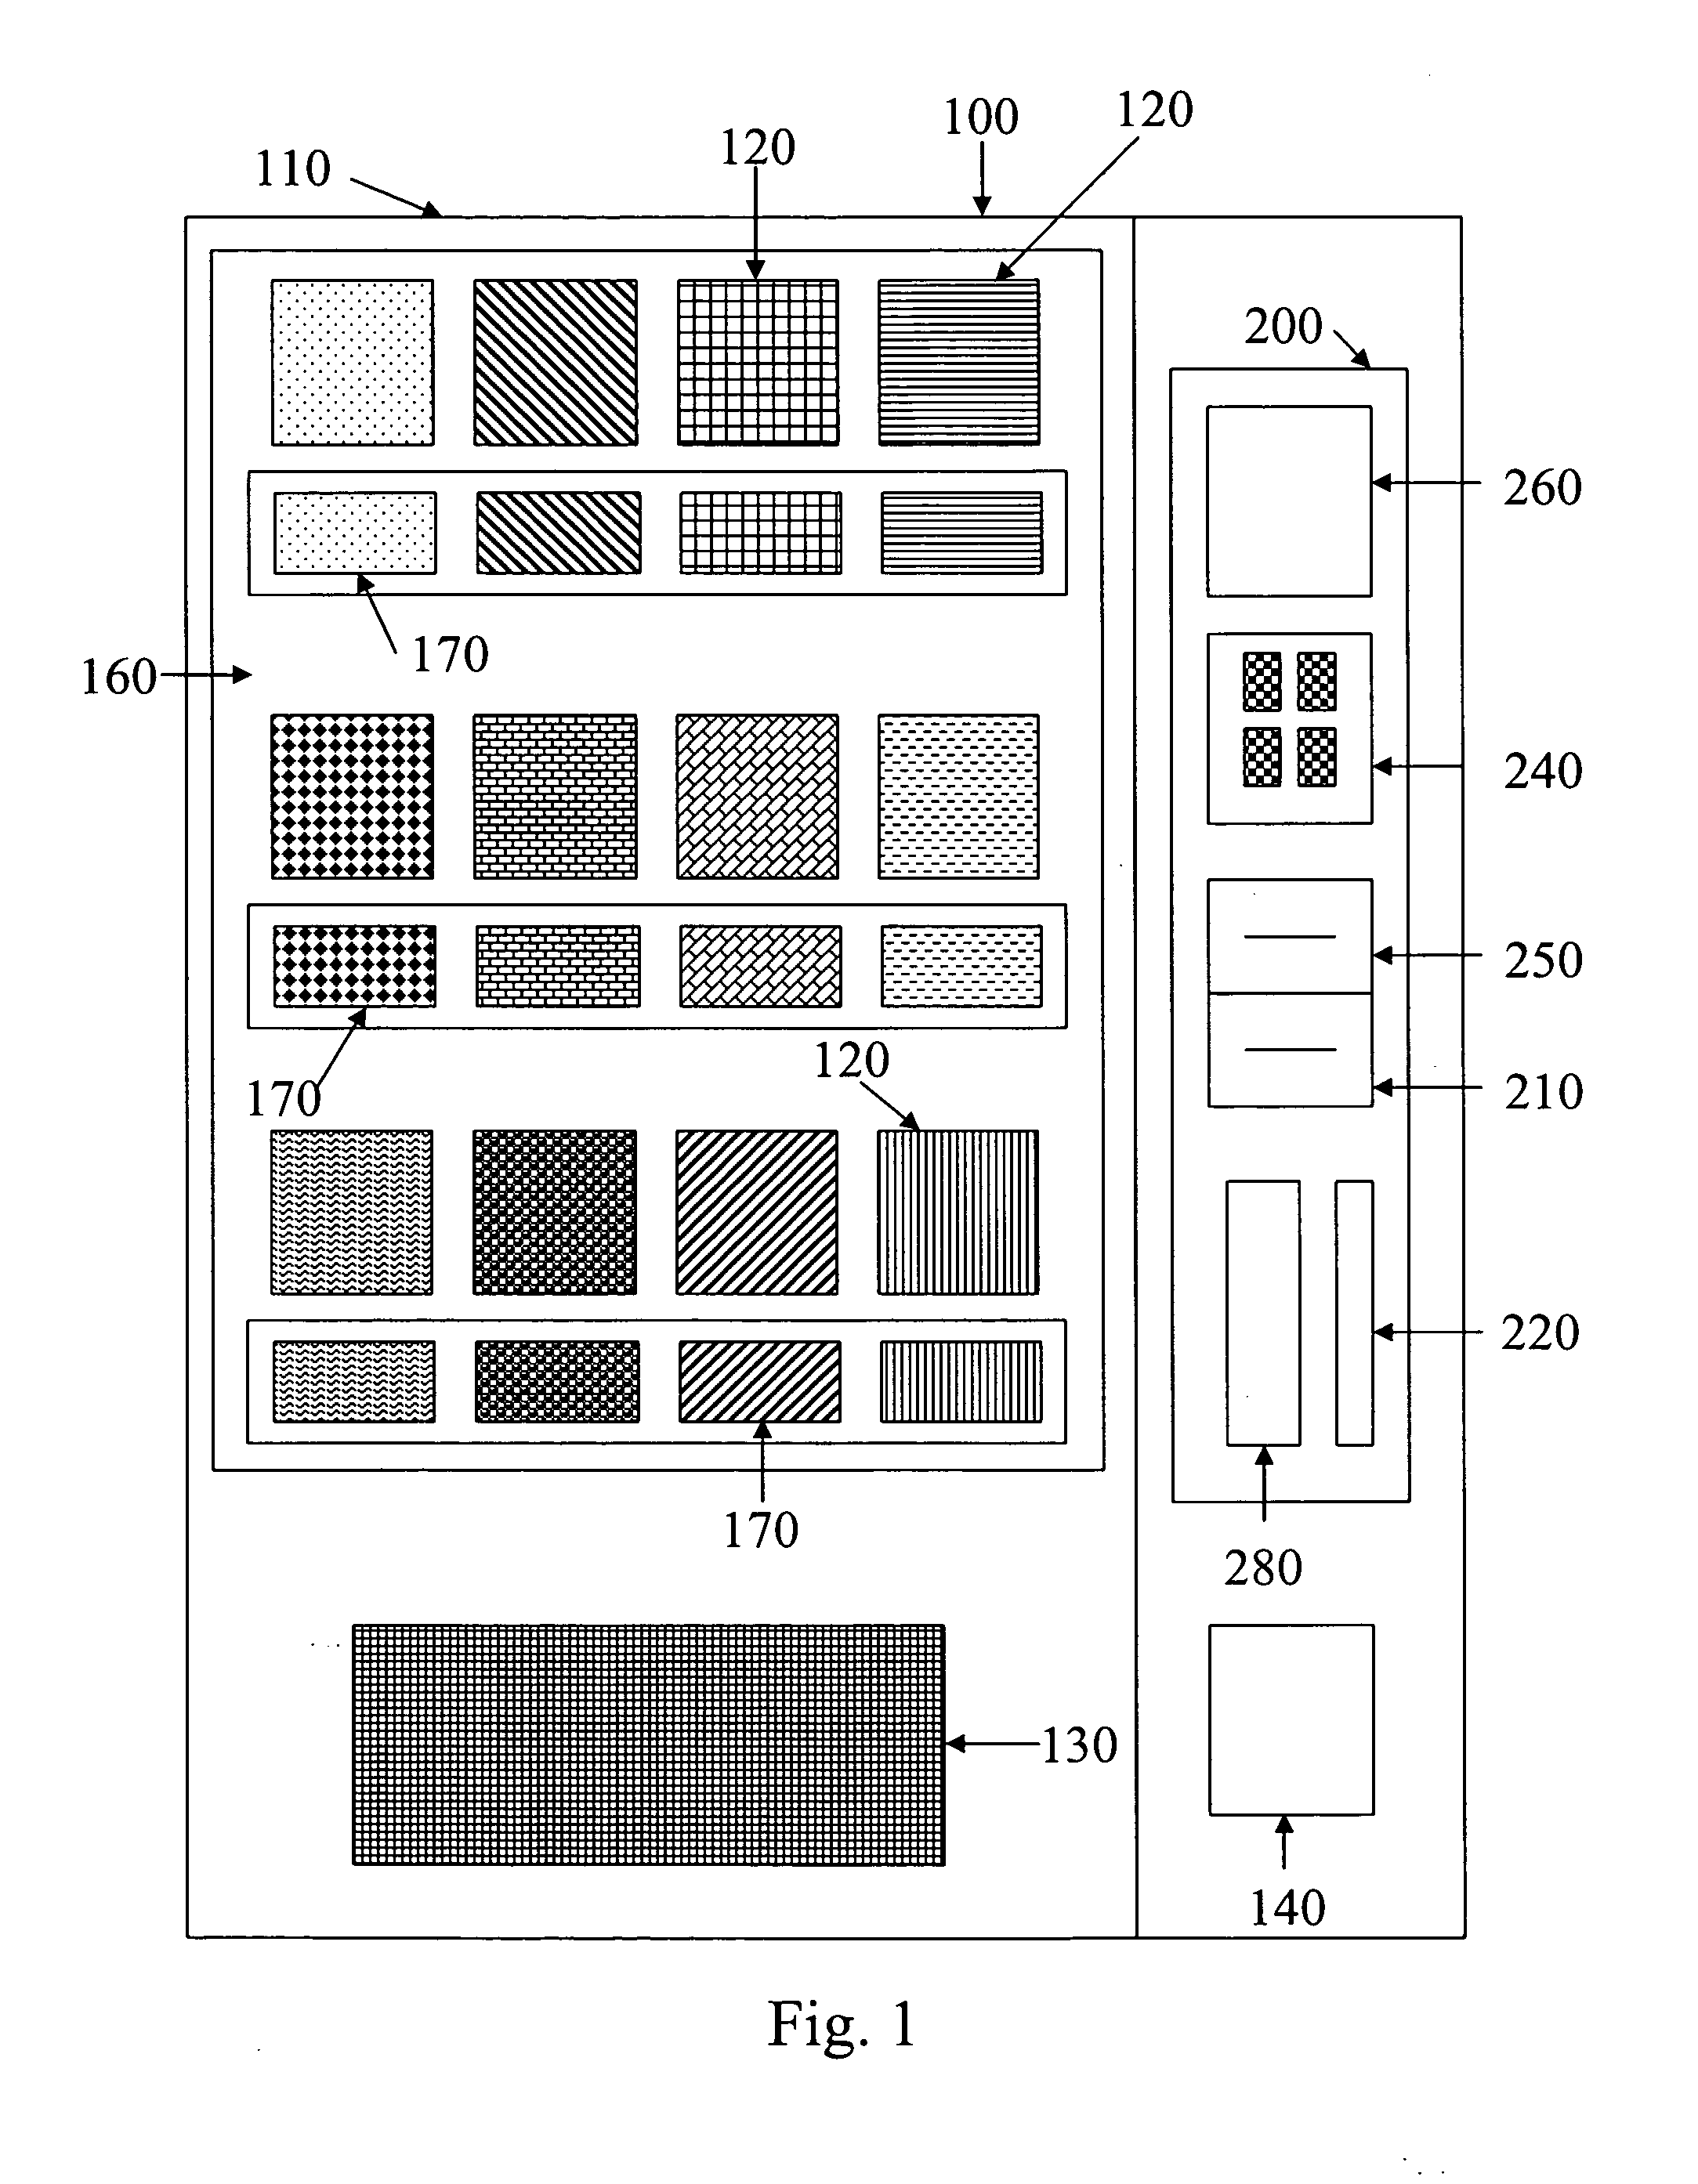 Client relationship management and product distribution system and method